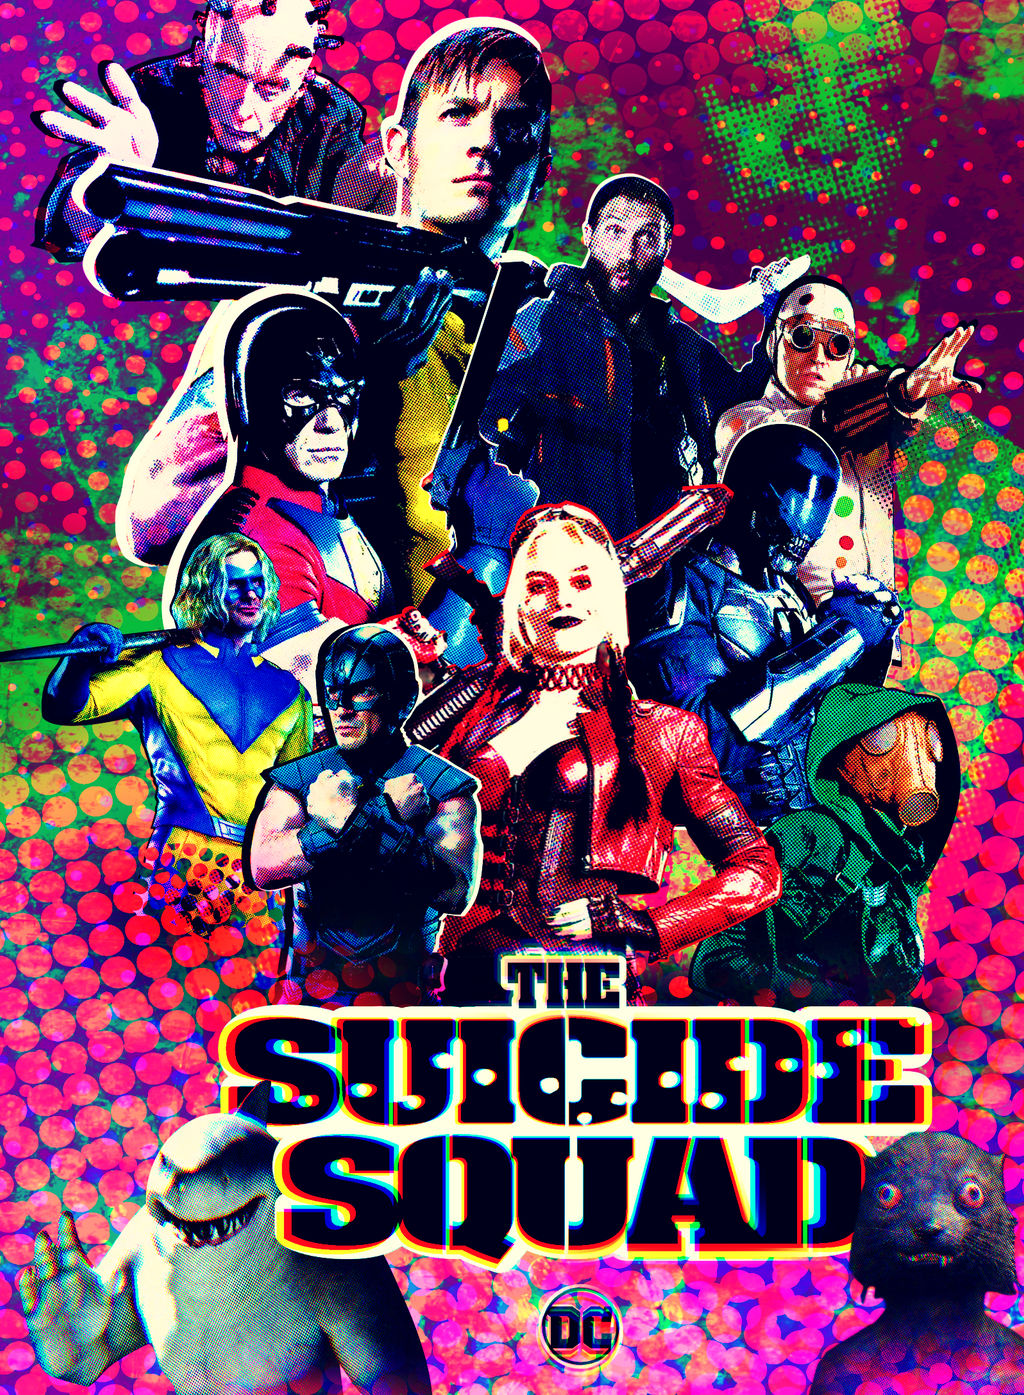 The Suicide Squad 2021 Poster by HowardChaykin on DeviantArt